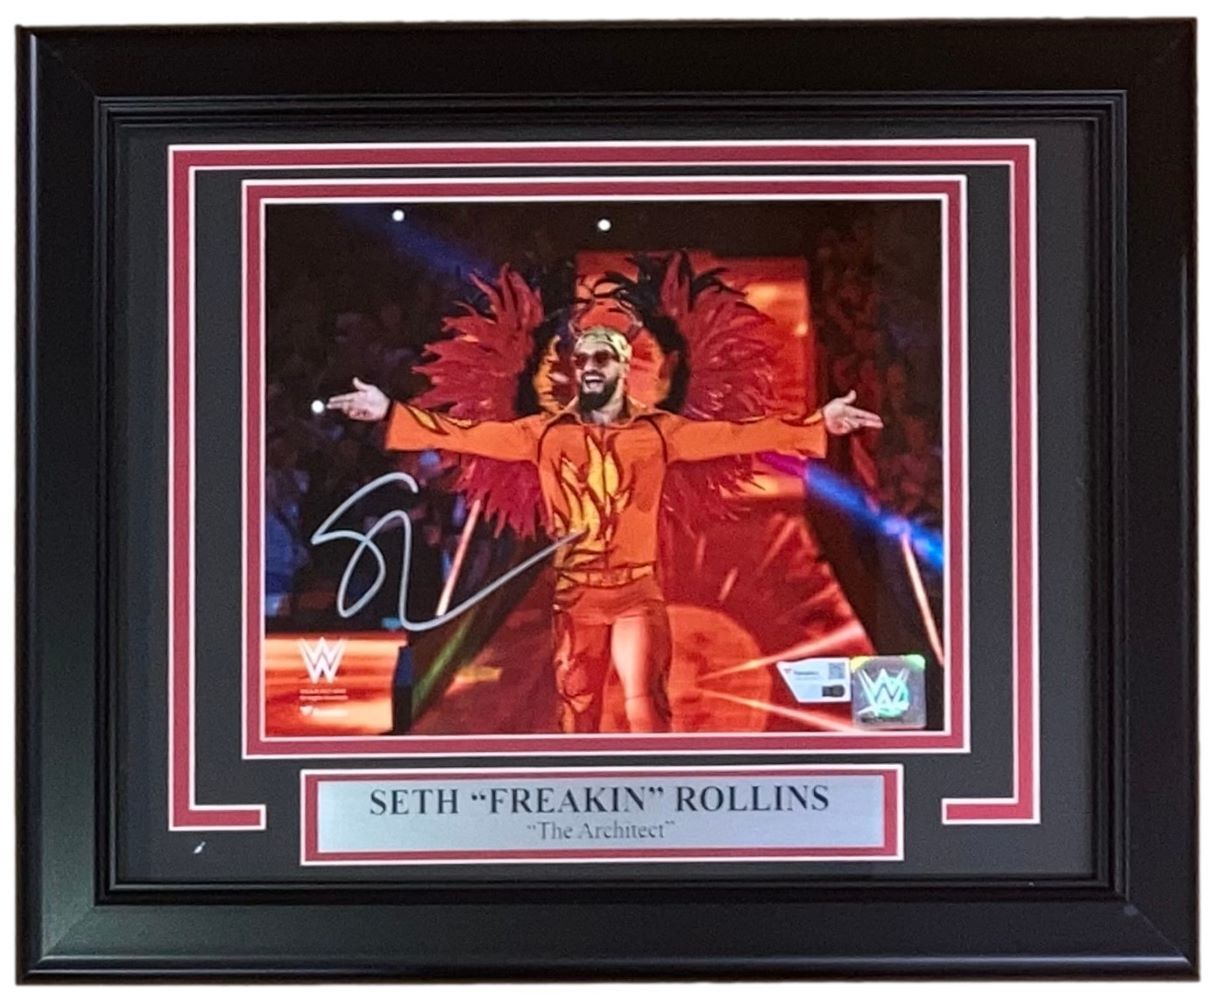 Primary image for Seth Rollins Signed Framed 8x10 WWE Clash At The Castle Photo Fanatics